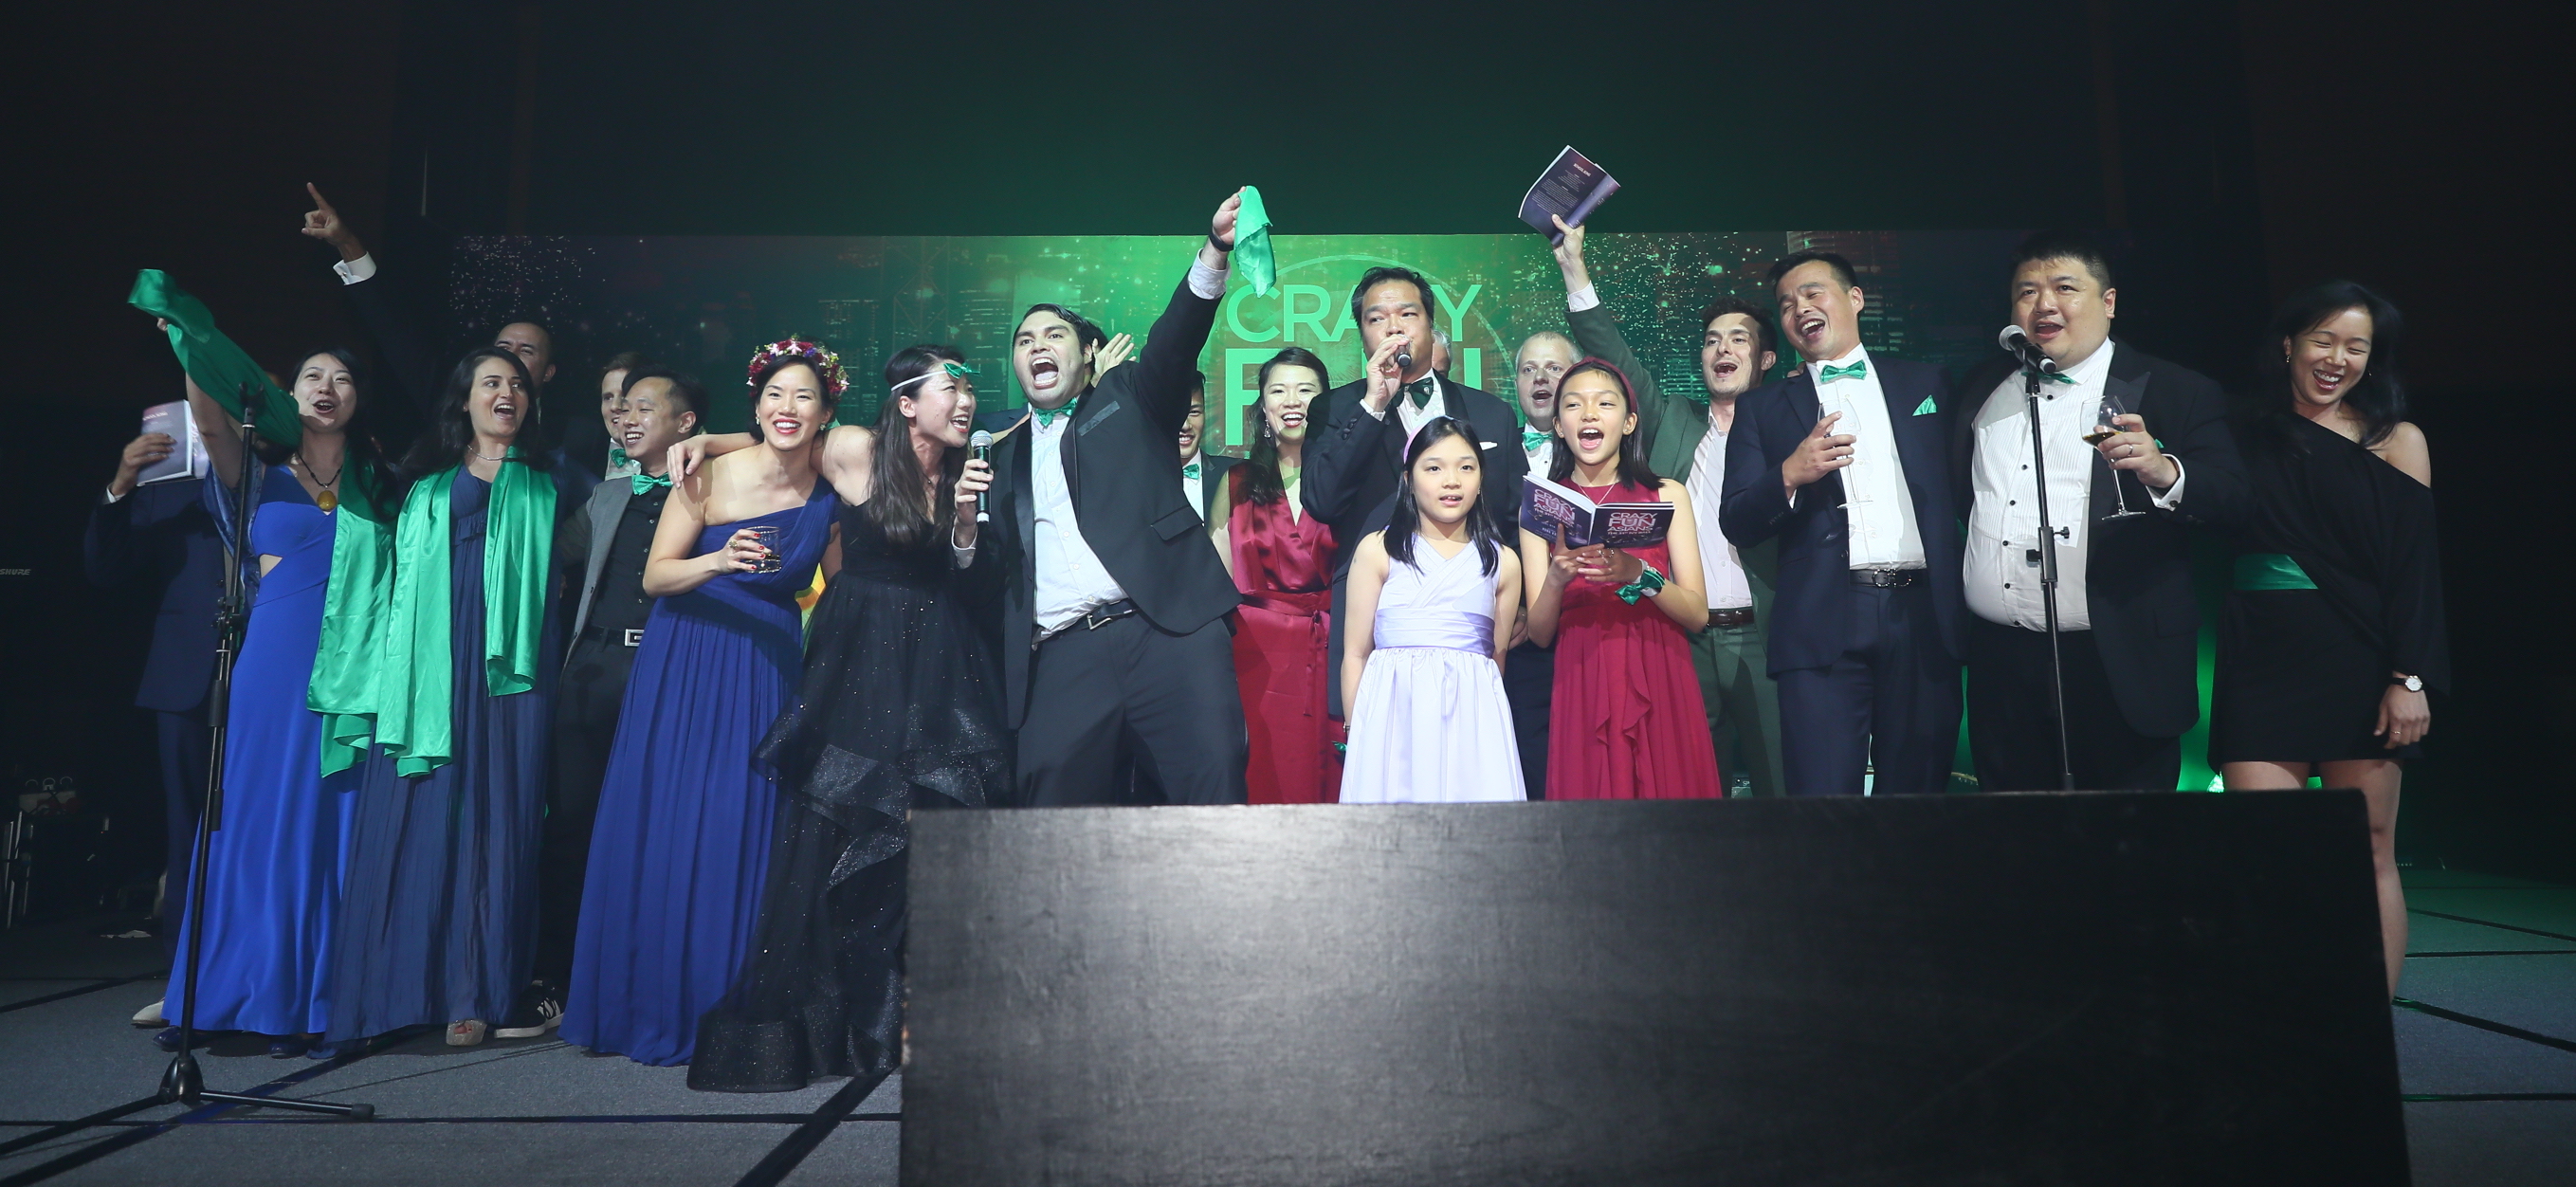 Dartmouth alumni singing on stage at the Ivy Ball in Hong Kong 